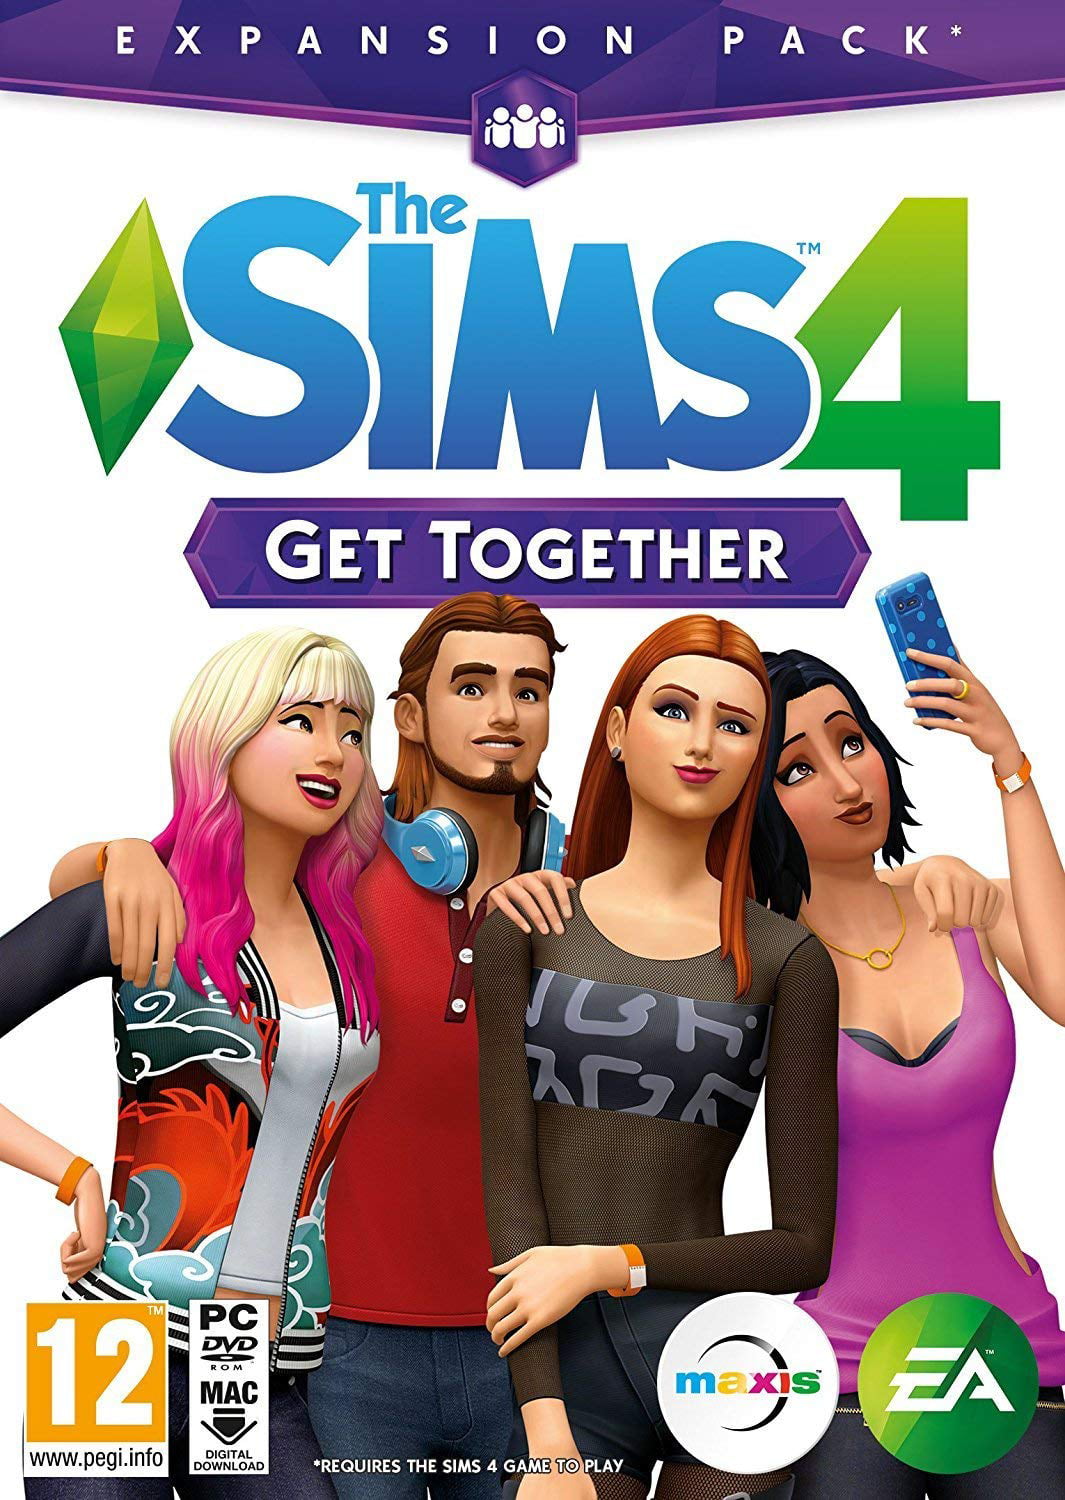 Sims 4 Mac - How to Download, install and Play Sims 4 on Mac